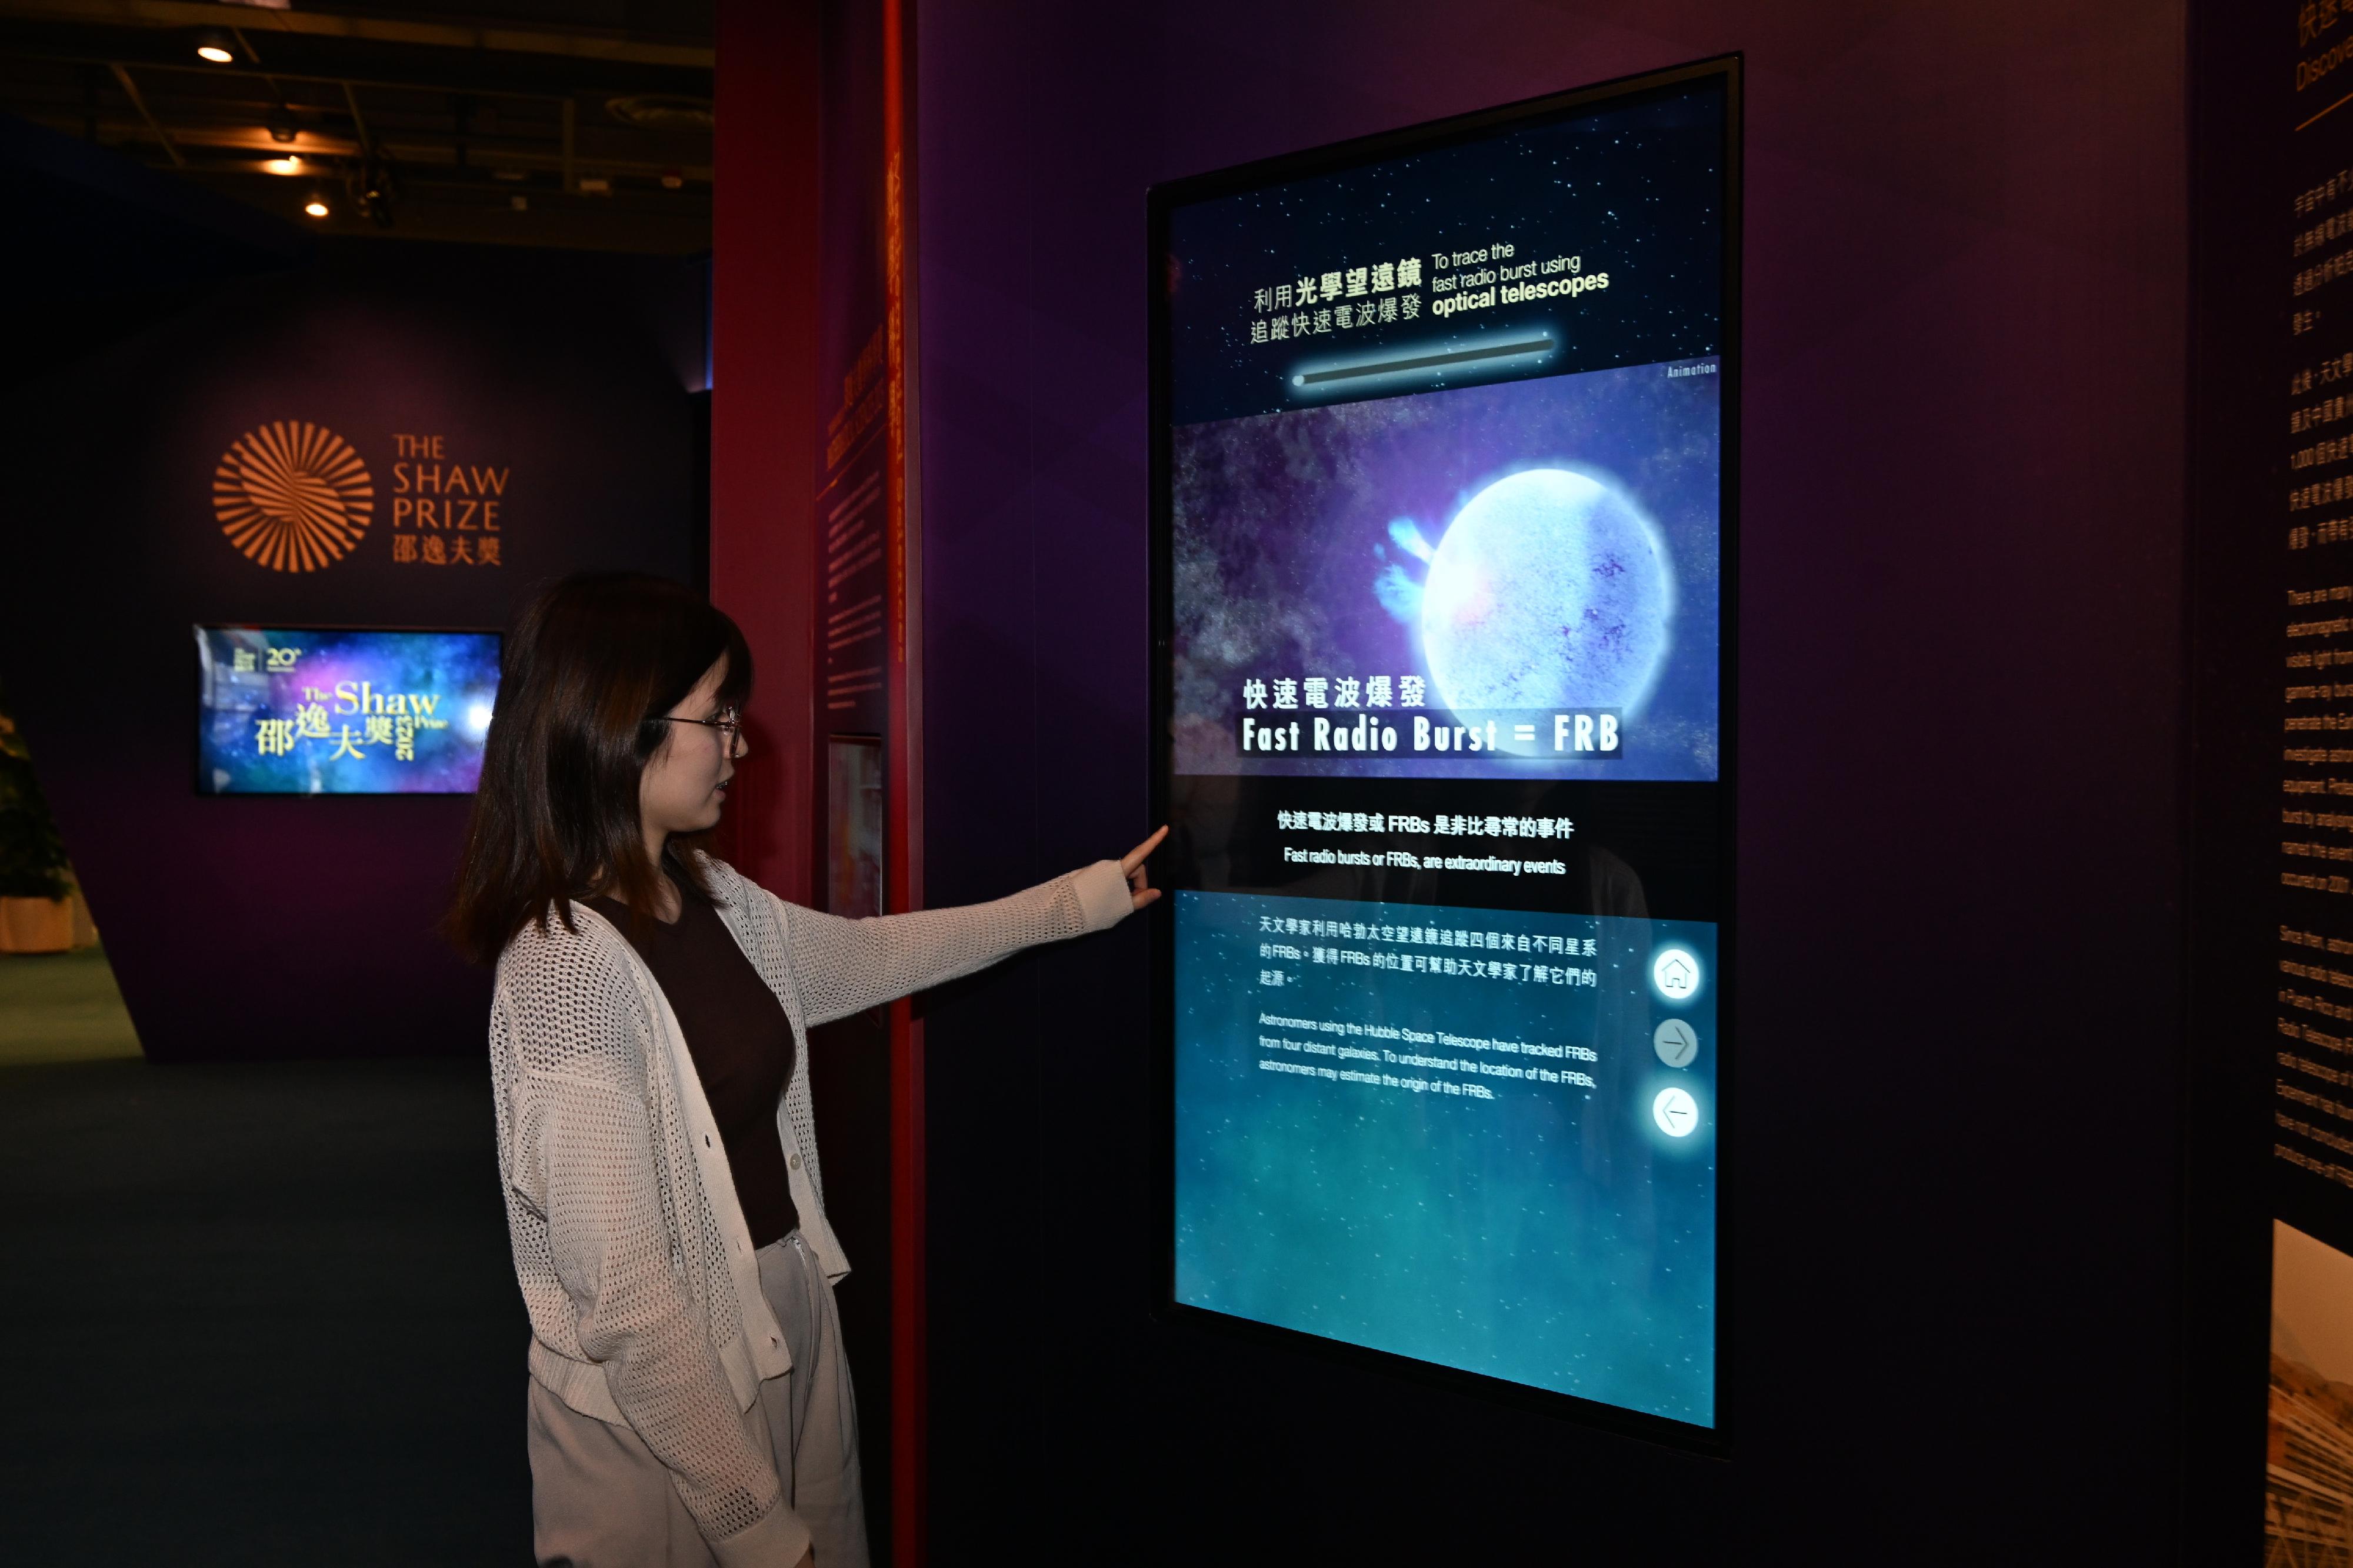 The Hong Kong Science Museum launched "The Shaw Prize 2023 Exhibition" today (November 10) to introduce the Shaw Laureates this year and their outstanding contributions, as well as basic science knowledge in the laureates' respective academic fields. The interactive exhibits at the exhibition enable visitors to learn about various science knowledge in an accessible way.